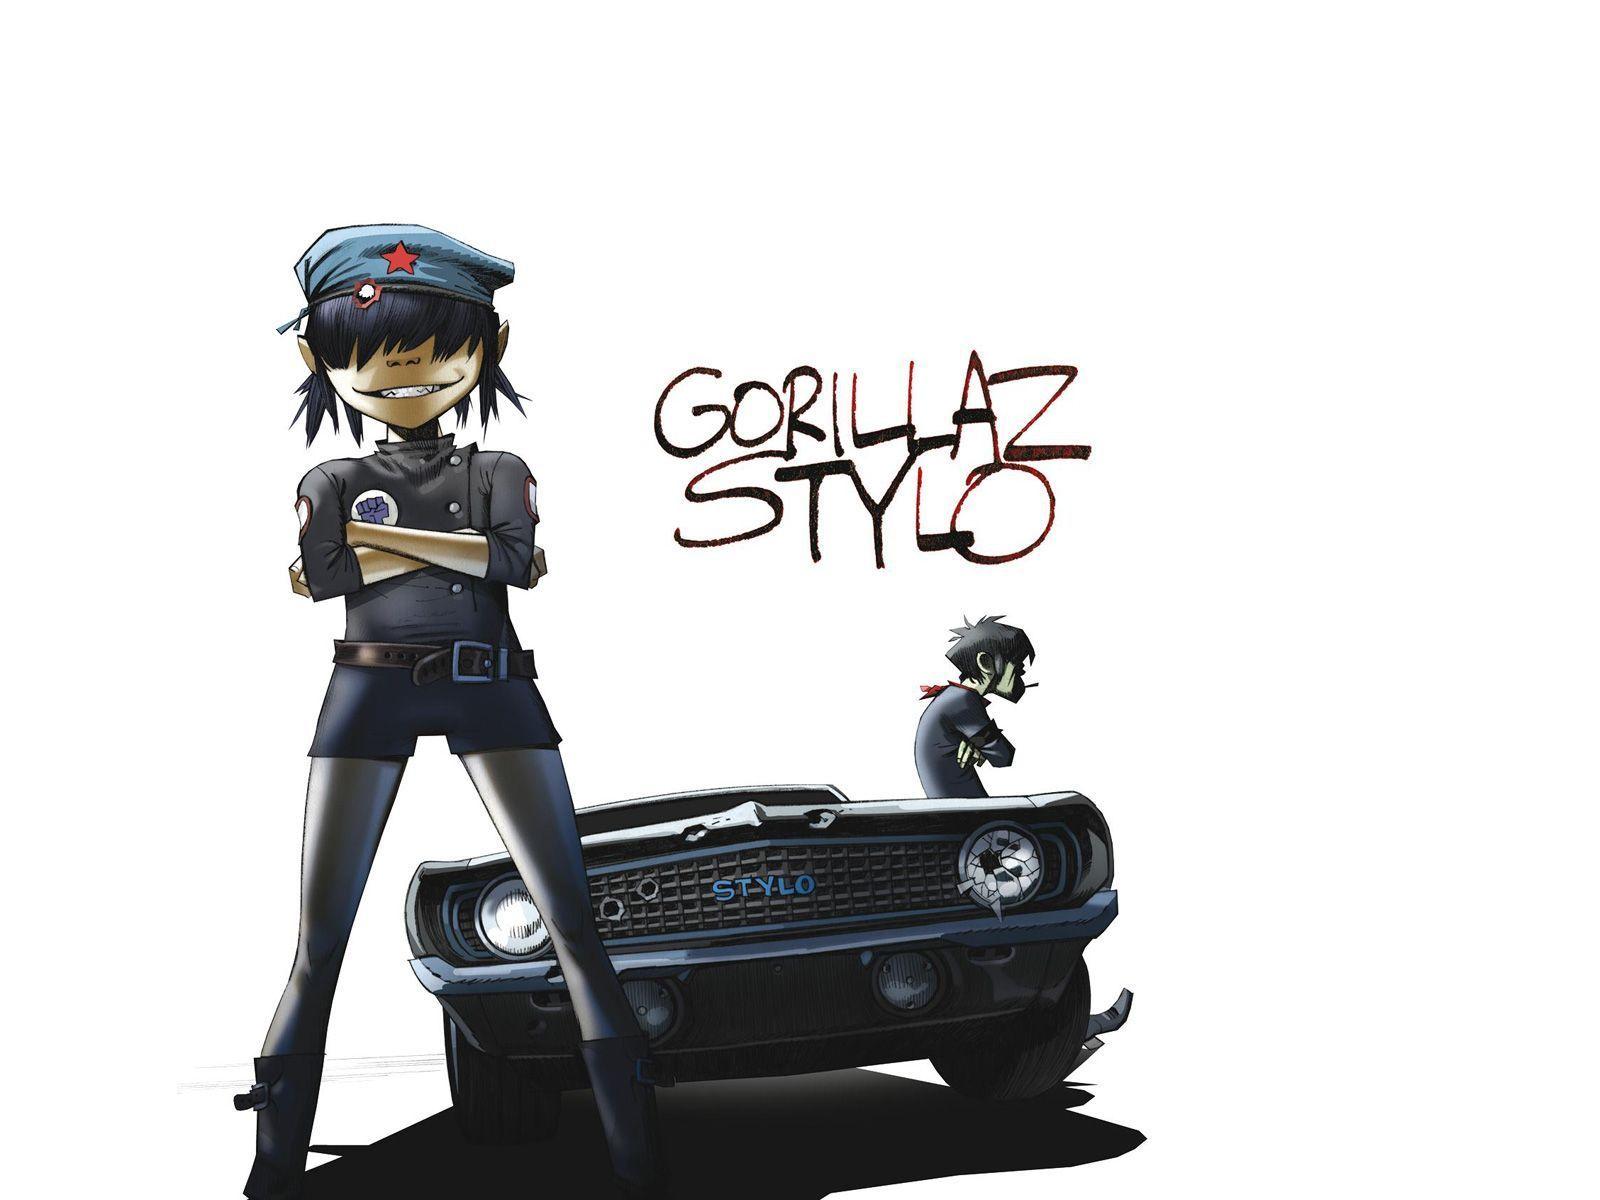 Gorillaz Hd Wallpapers and Backgrounds